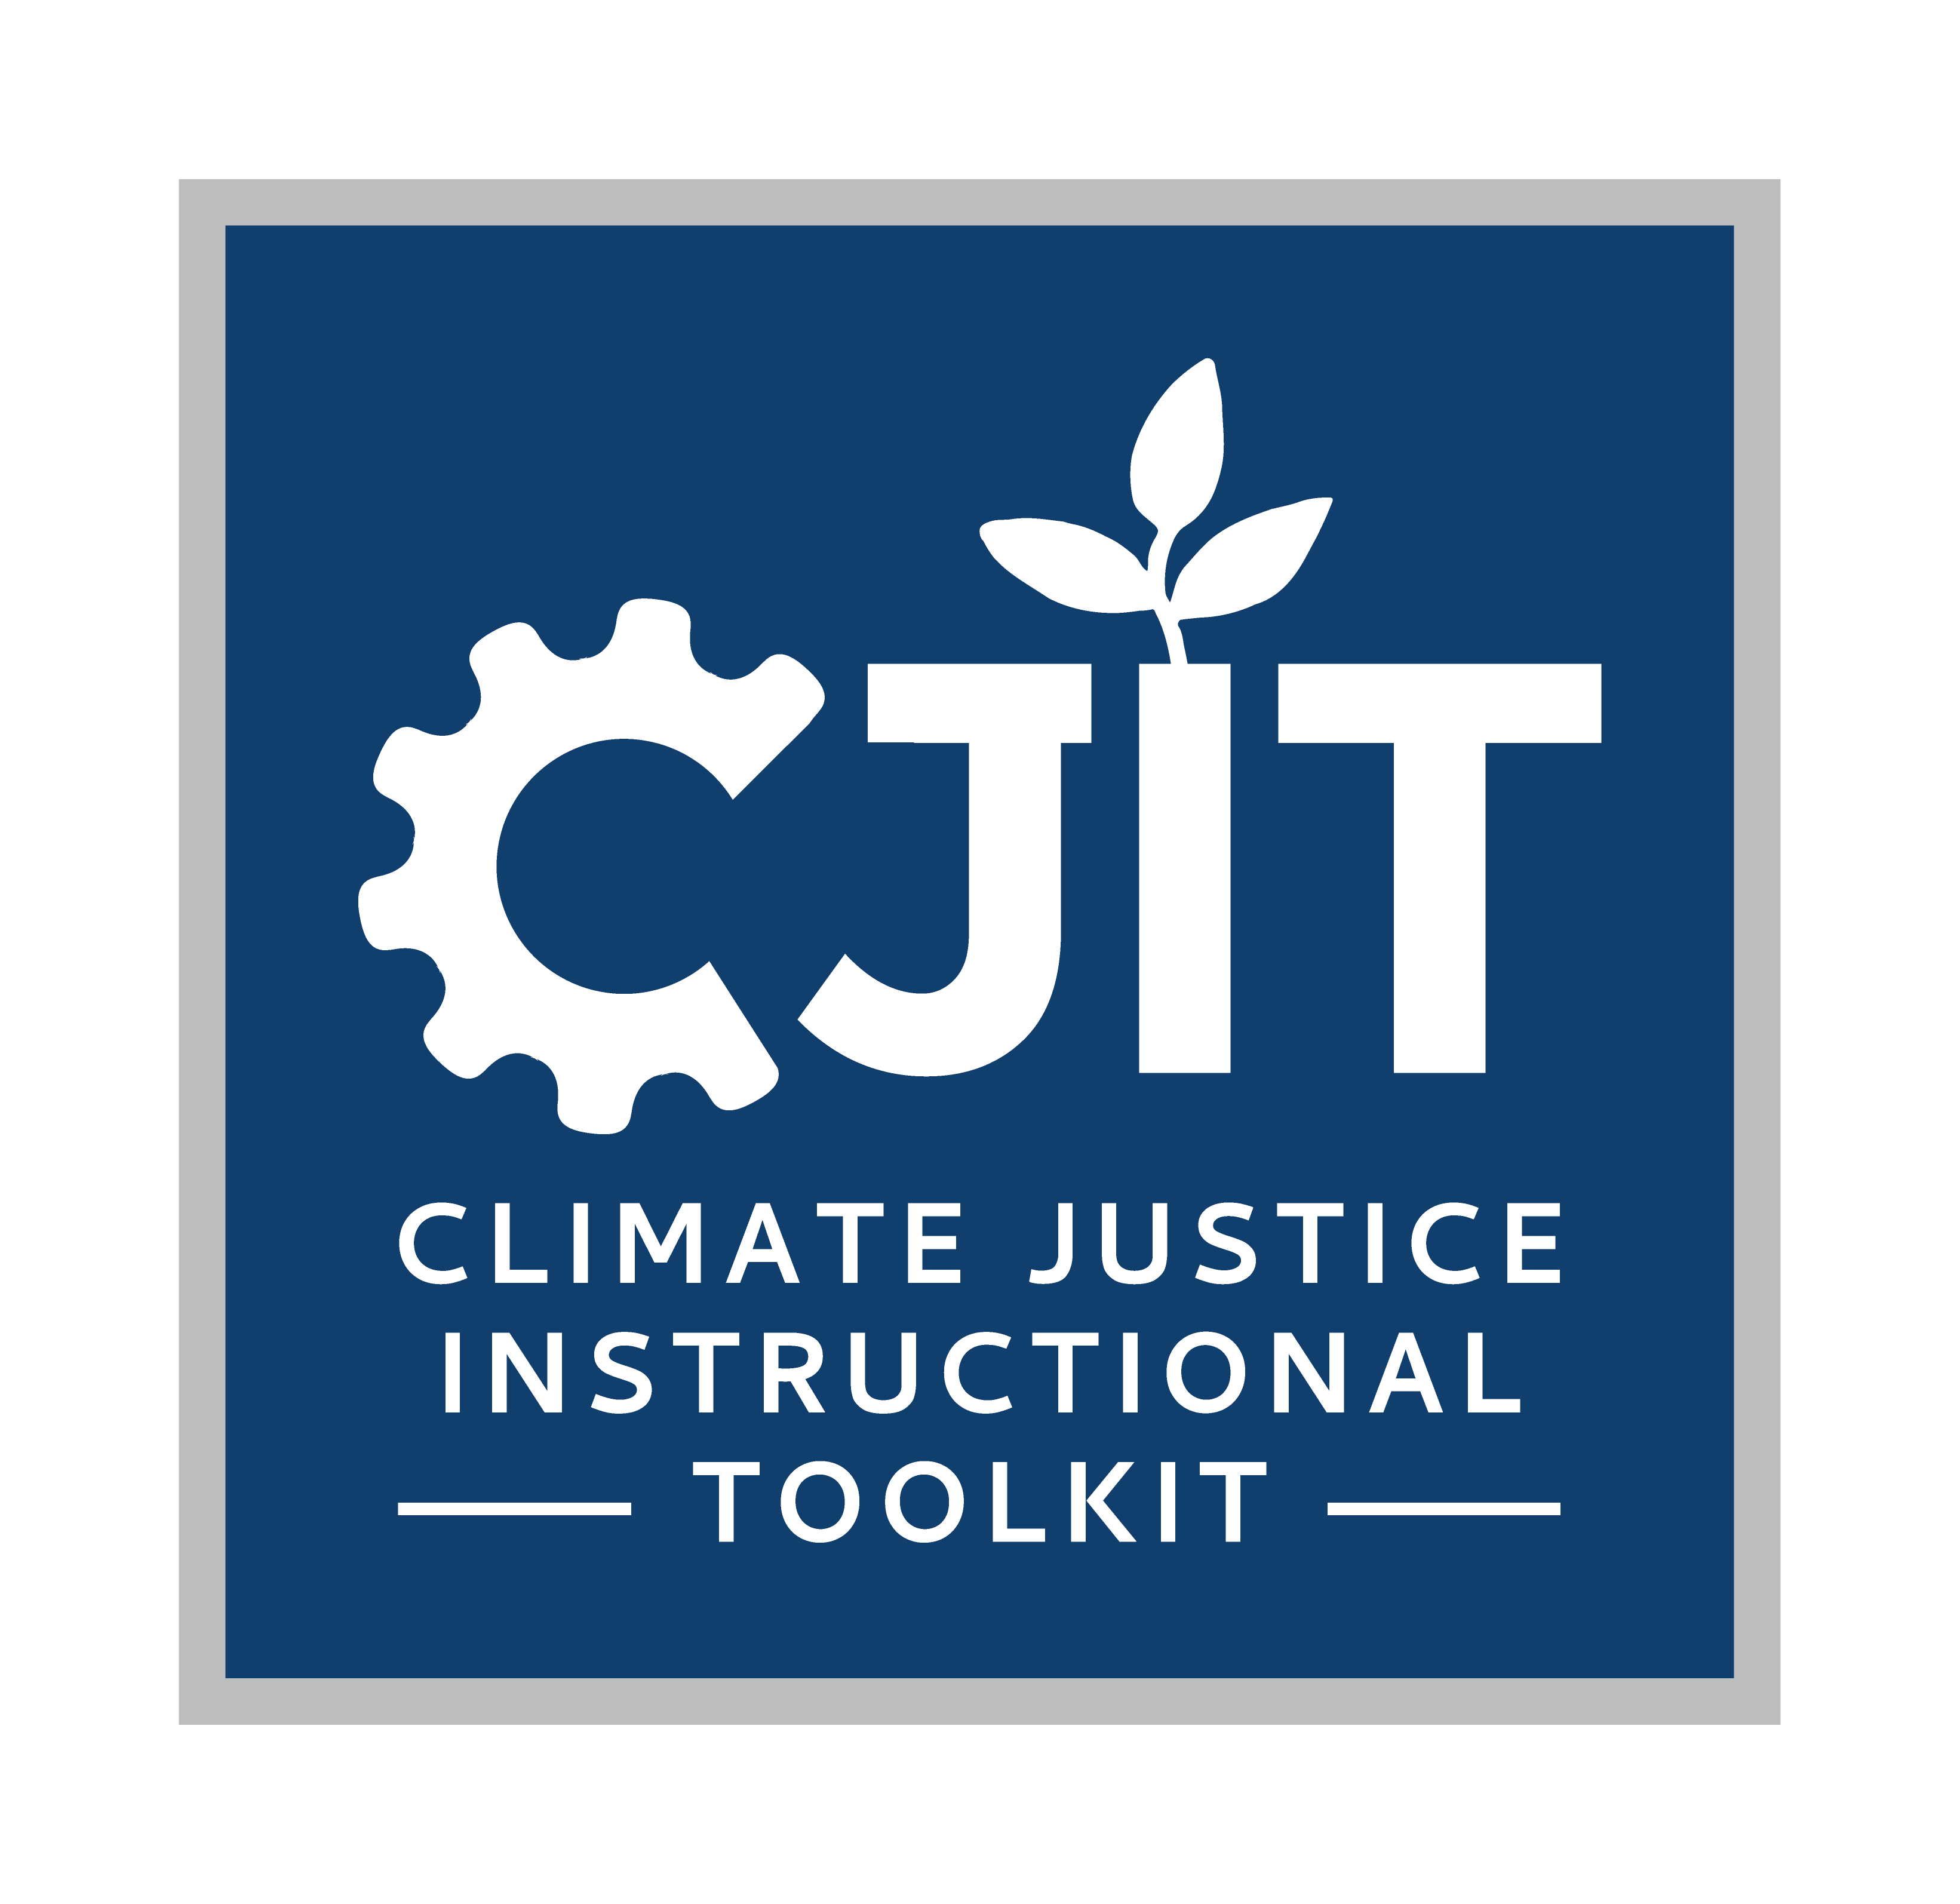 The logo of the Climate Justice Instructional Toolkit